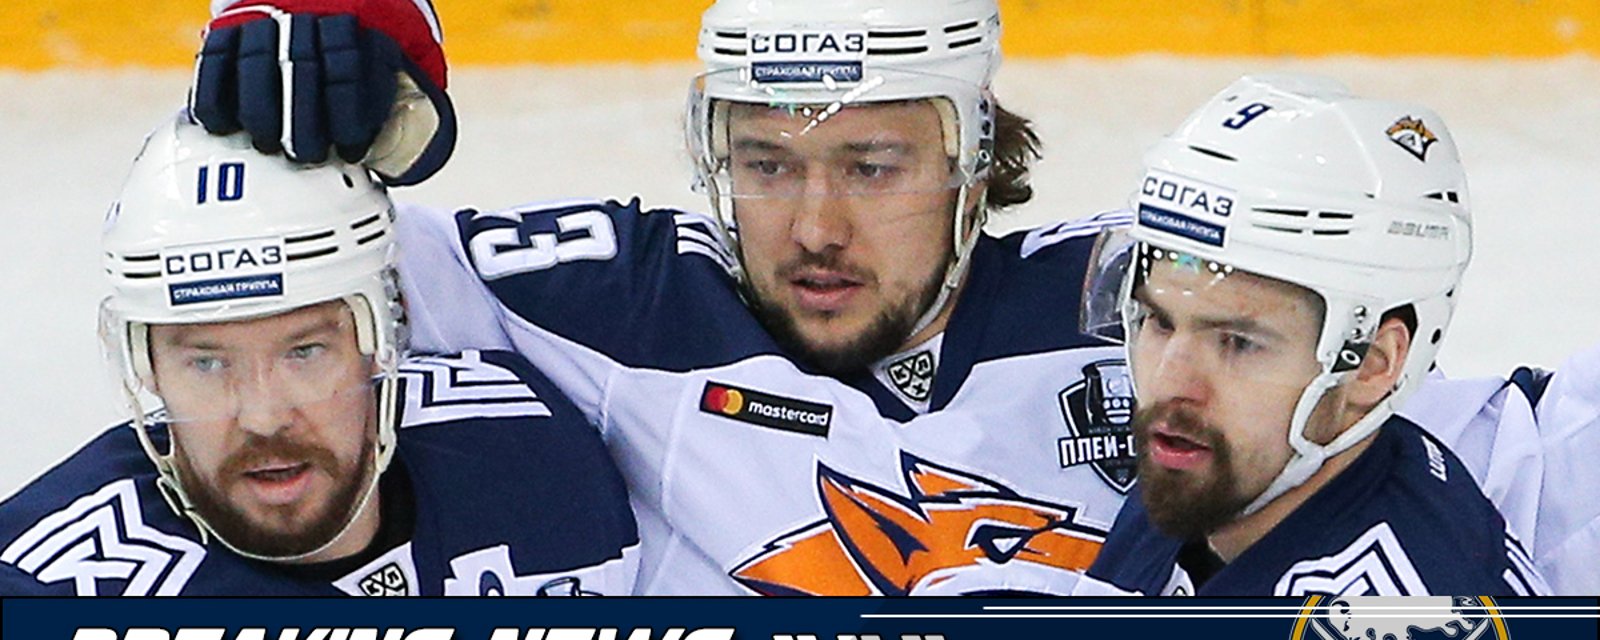 REPORT: Top KHL defensman tears up contract to join Sabres